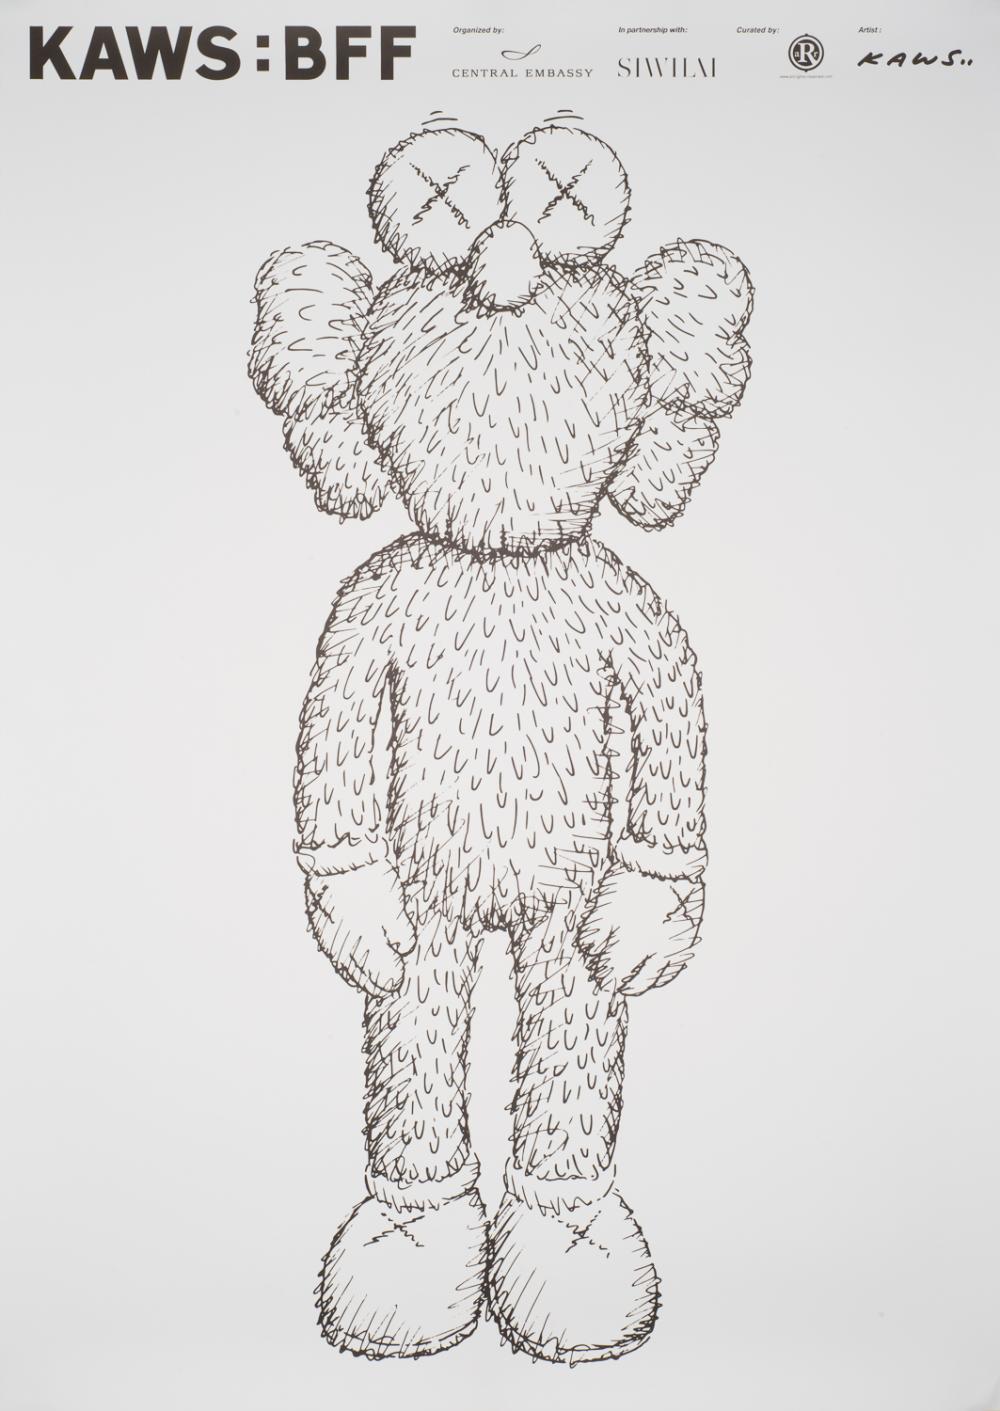 Kaws - BFF 2016 Exhibition Poster